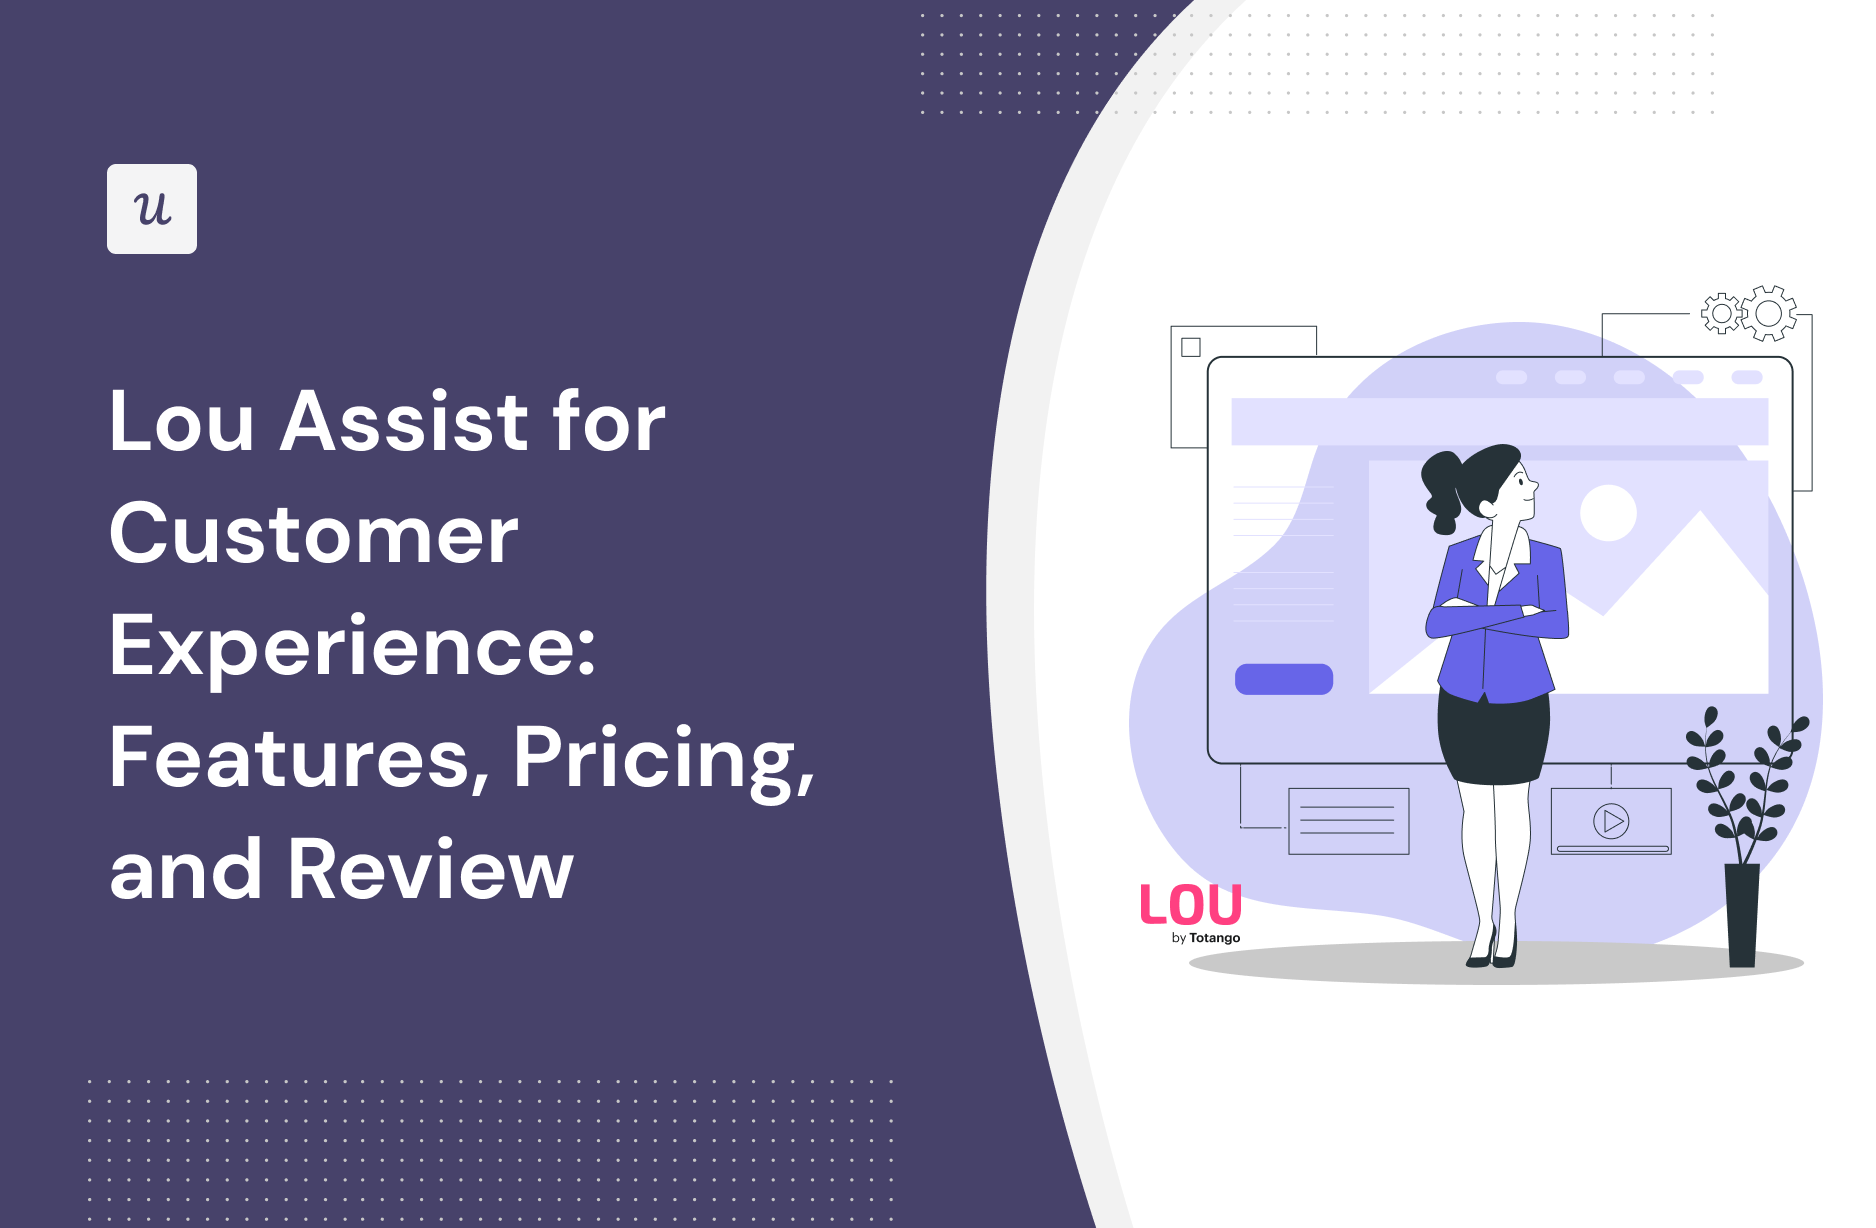 Lou Assist for Customer Experience: Features, Pricing, and Review